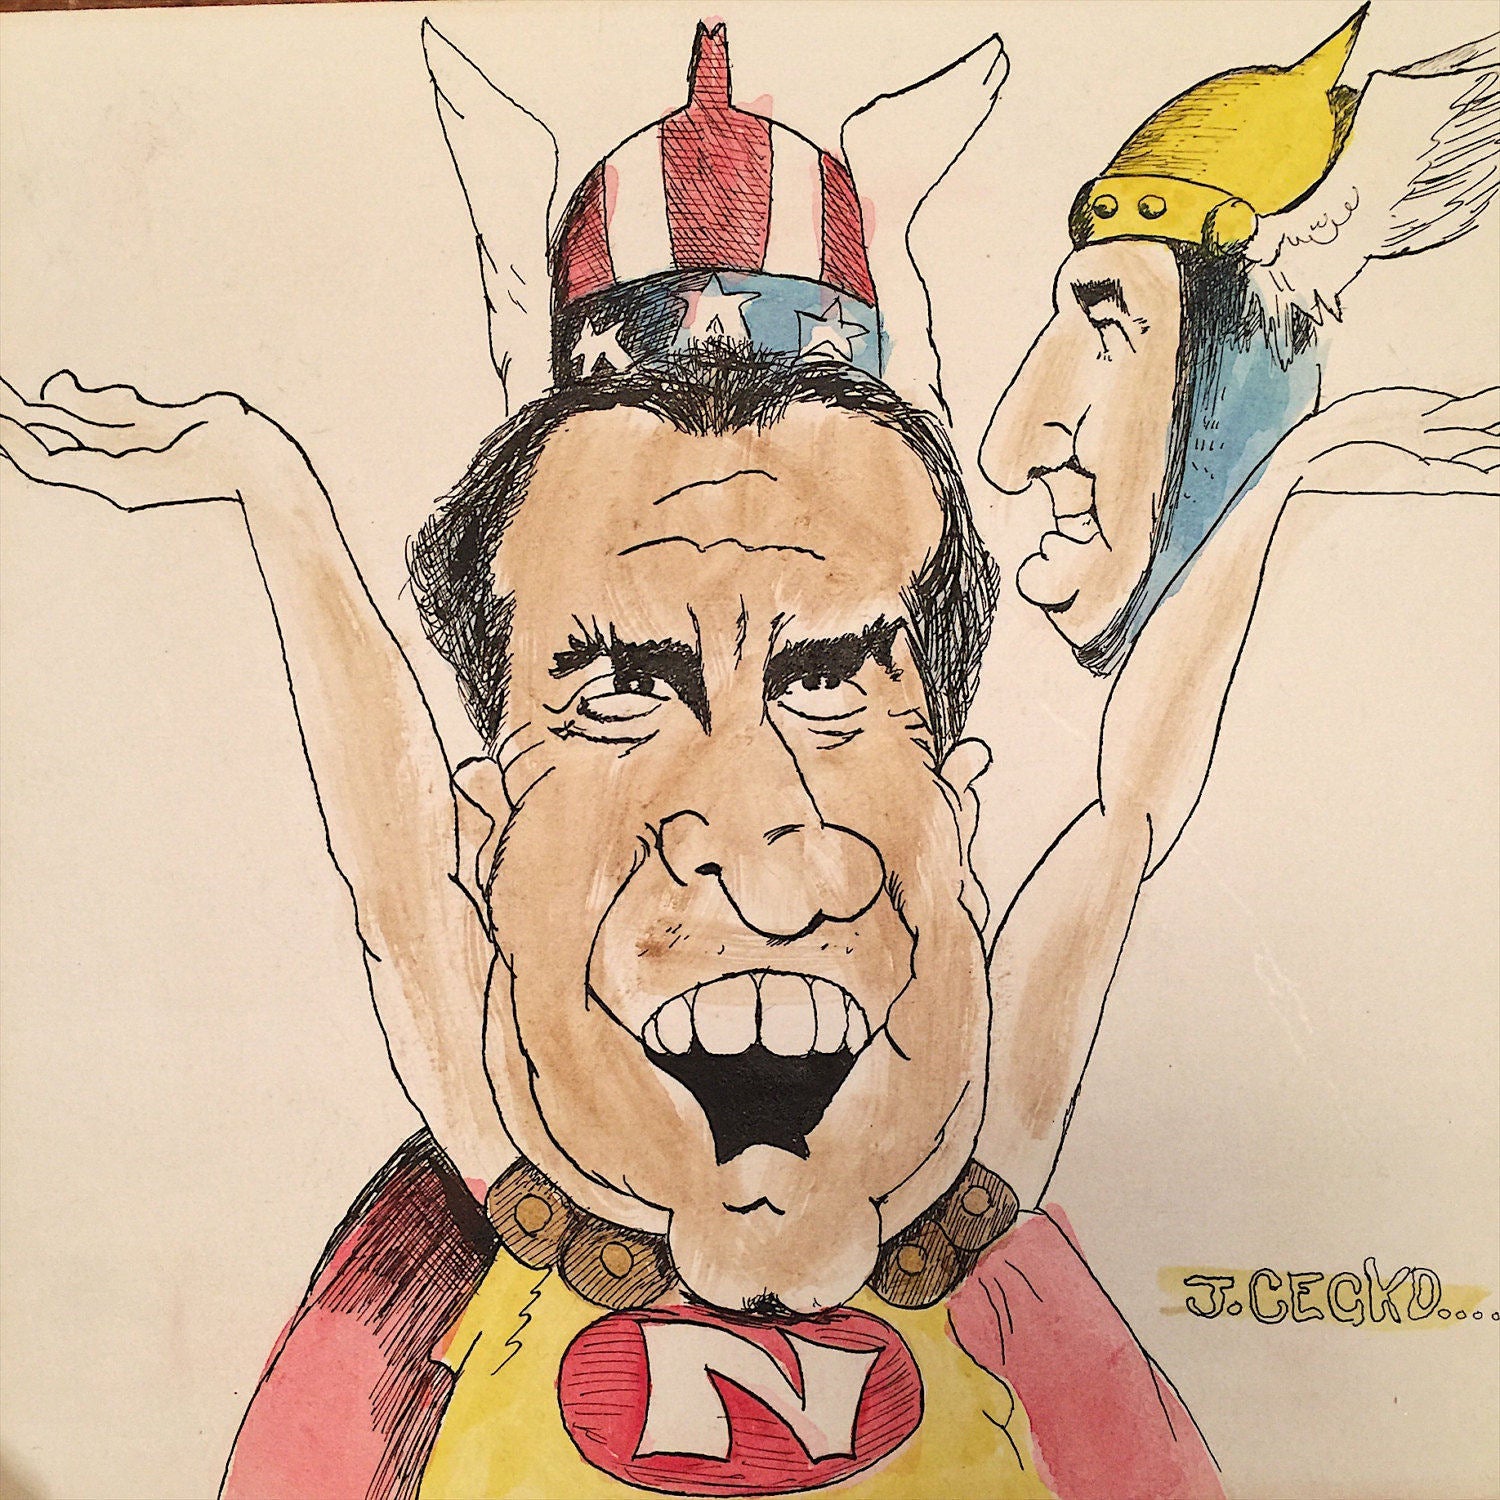 Vintage Counter Culture Drawing of Nixon Agnew - Signed J. Cecko? - Mystery Artist - 1970s - Underground Art - Superhero Costumes - Unframed